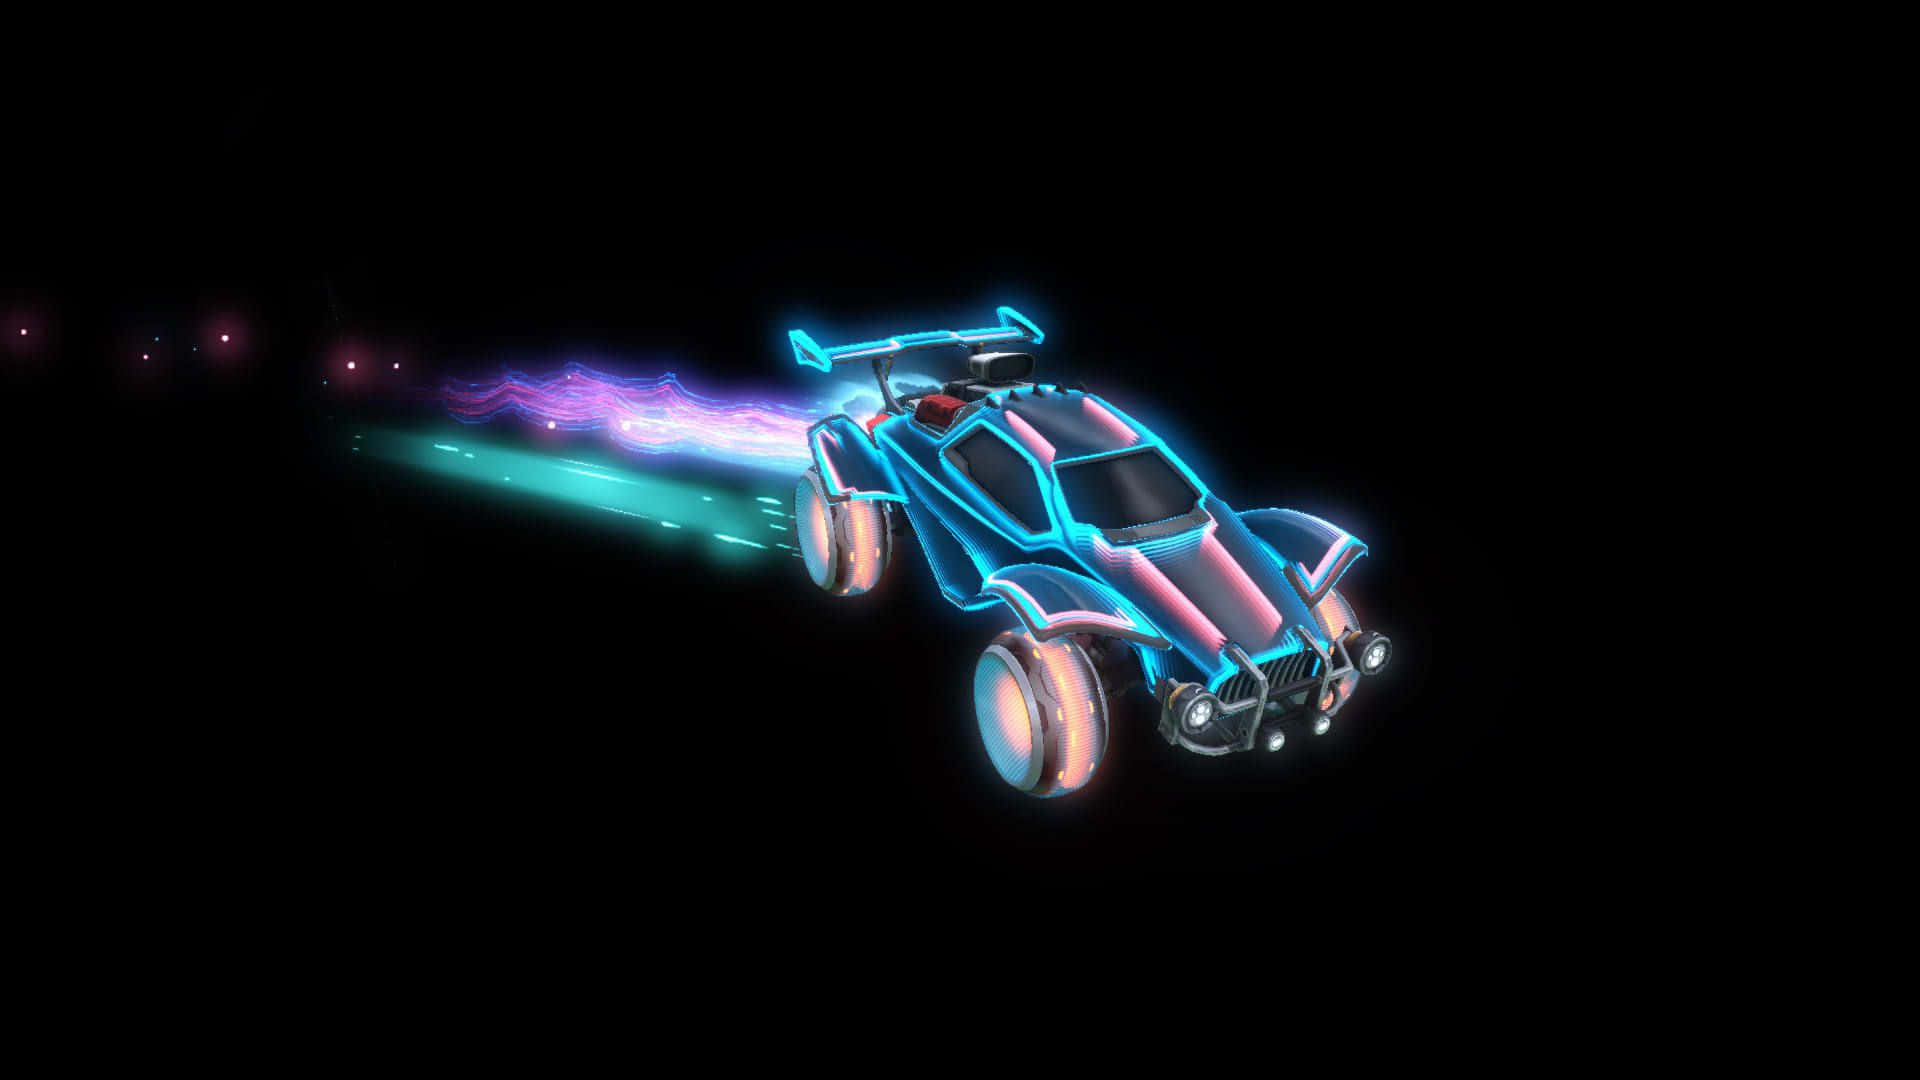 A Neon Car Is Flying Through The Dark Wallpaper